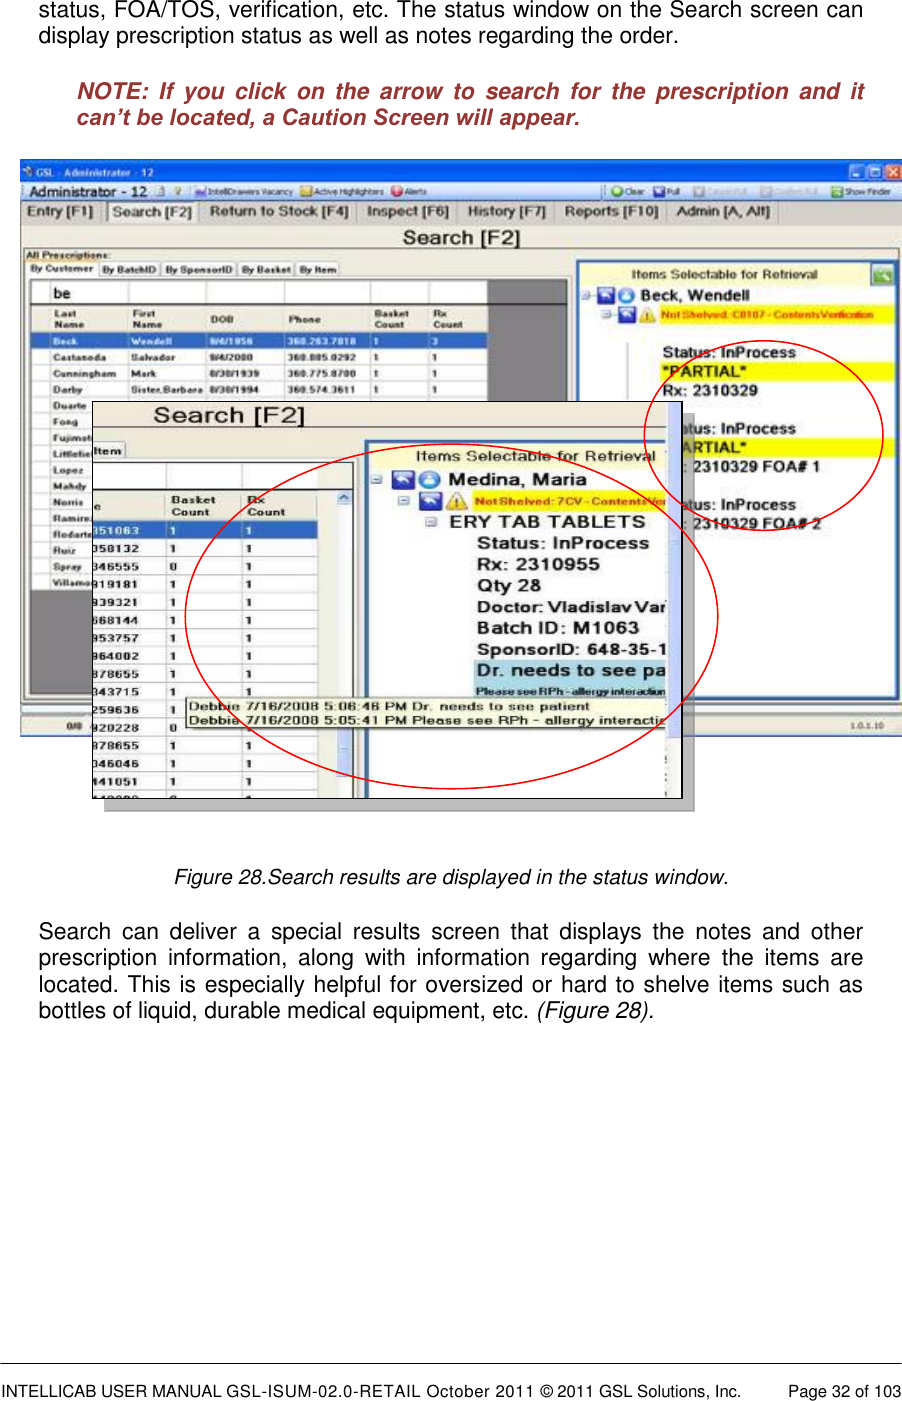  INTELLICAB USER MANUAL GSL-ISUM-02.0-RETAIL October 2011 © 2011 GSL Solutions, Inc.   Page 32 of 103   status, FOA/TOS, verification, etc. The status window on the Search screen can display prescription status as well as notes regarding the order. NOTE:  If  you  click  on  the  arrow  to  search  for  the  prescription  and  it can’t be located, a Caution Screen will appear.   Figure 28.Search results are displayed in the status window. Search  can  deliver  a  special  results  screen  that  displays  the  notes  and  other prescription  information,  along  with  information  regarding  where  the  items  are located. This is especially helpful for oversized or hard to shelve items such as bottles of liquid, durable medical equipment, etc. (Figure 28).  